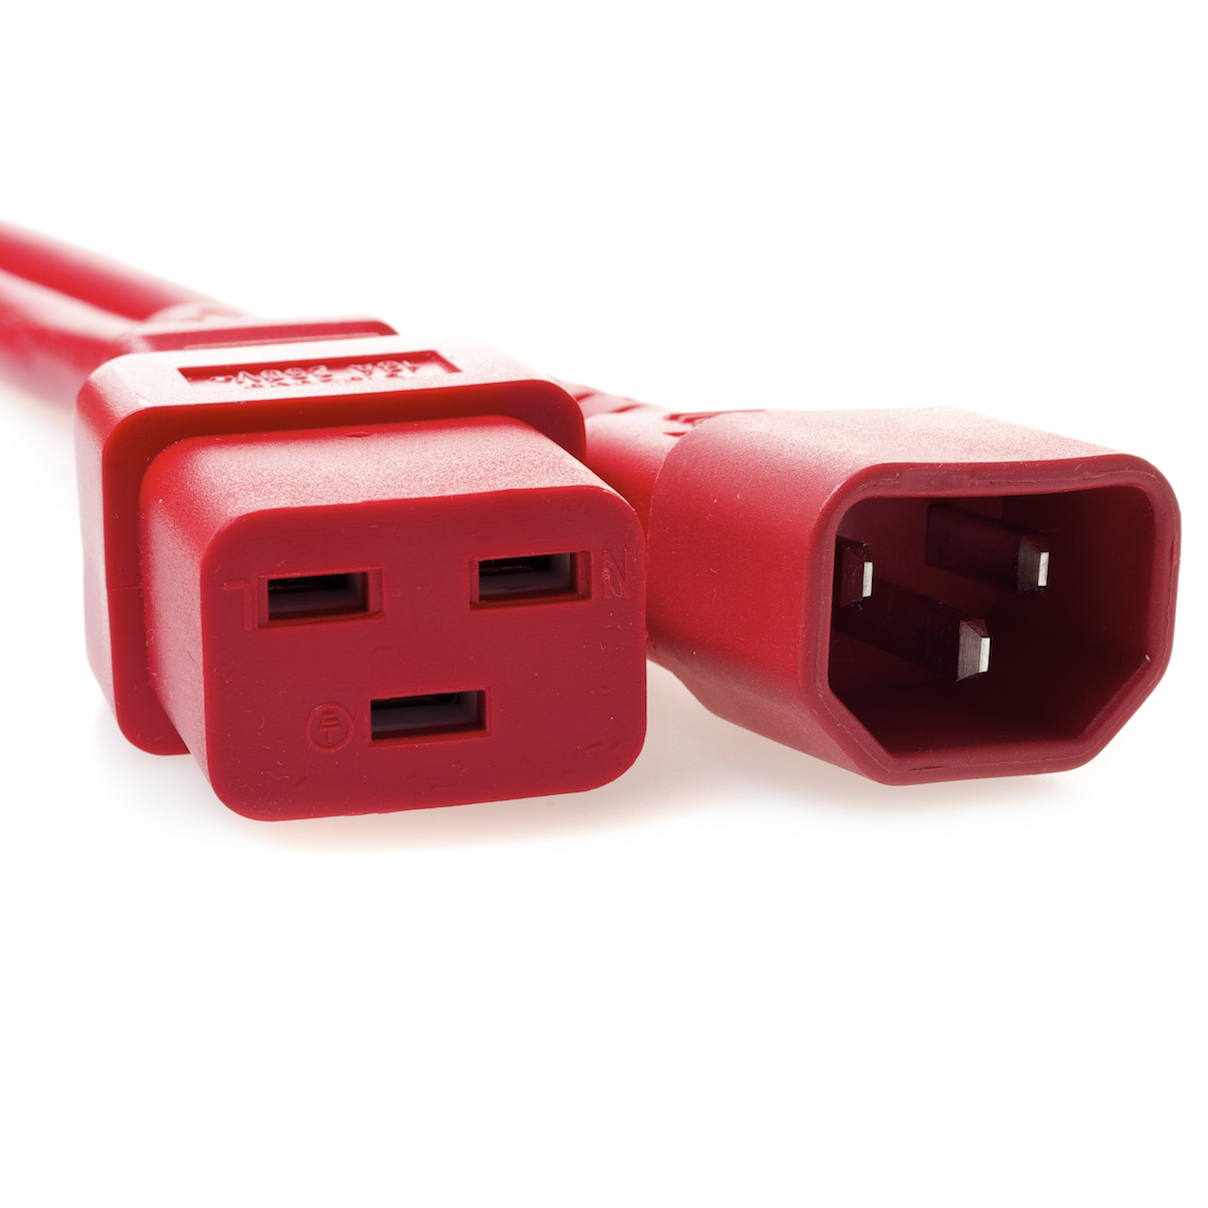 C14 Plug Male to C19 Connector Female 10 Feet 15 Amp 14/3 SJT 250v Power Cord- Red